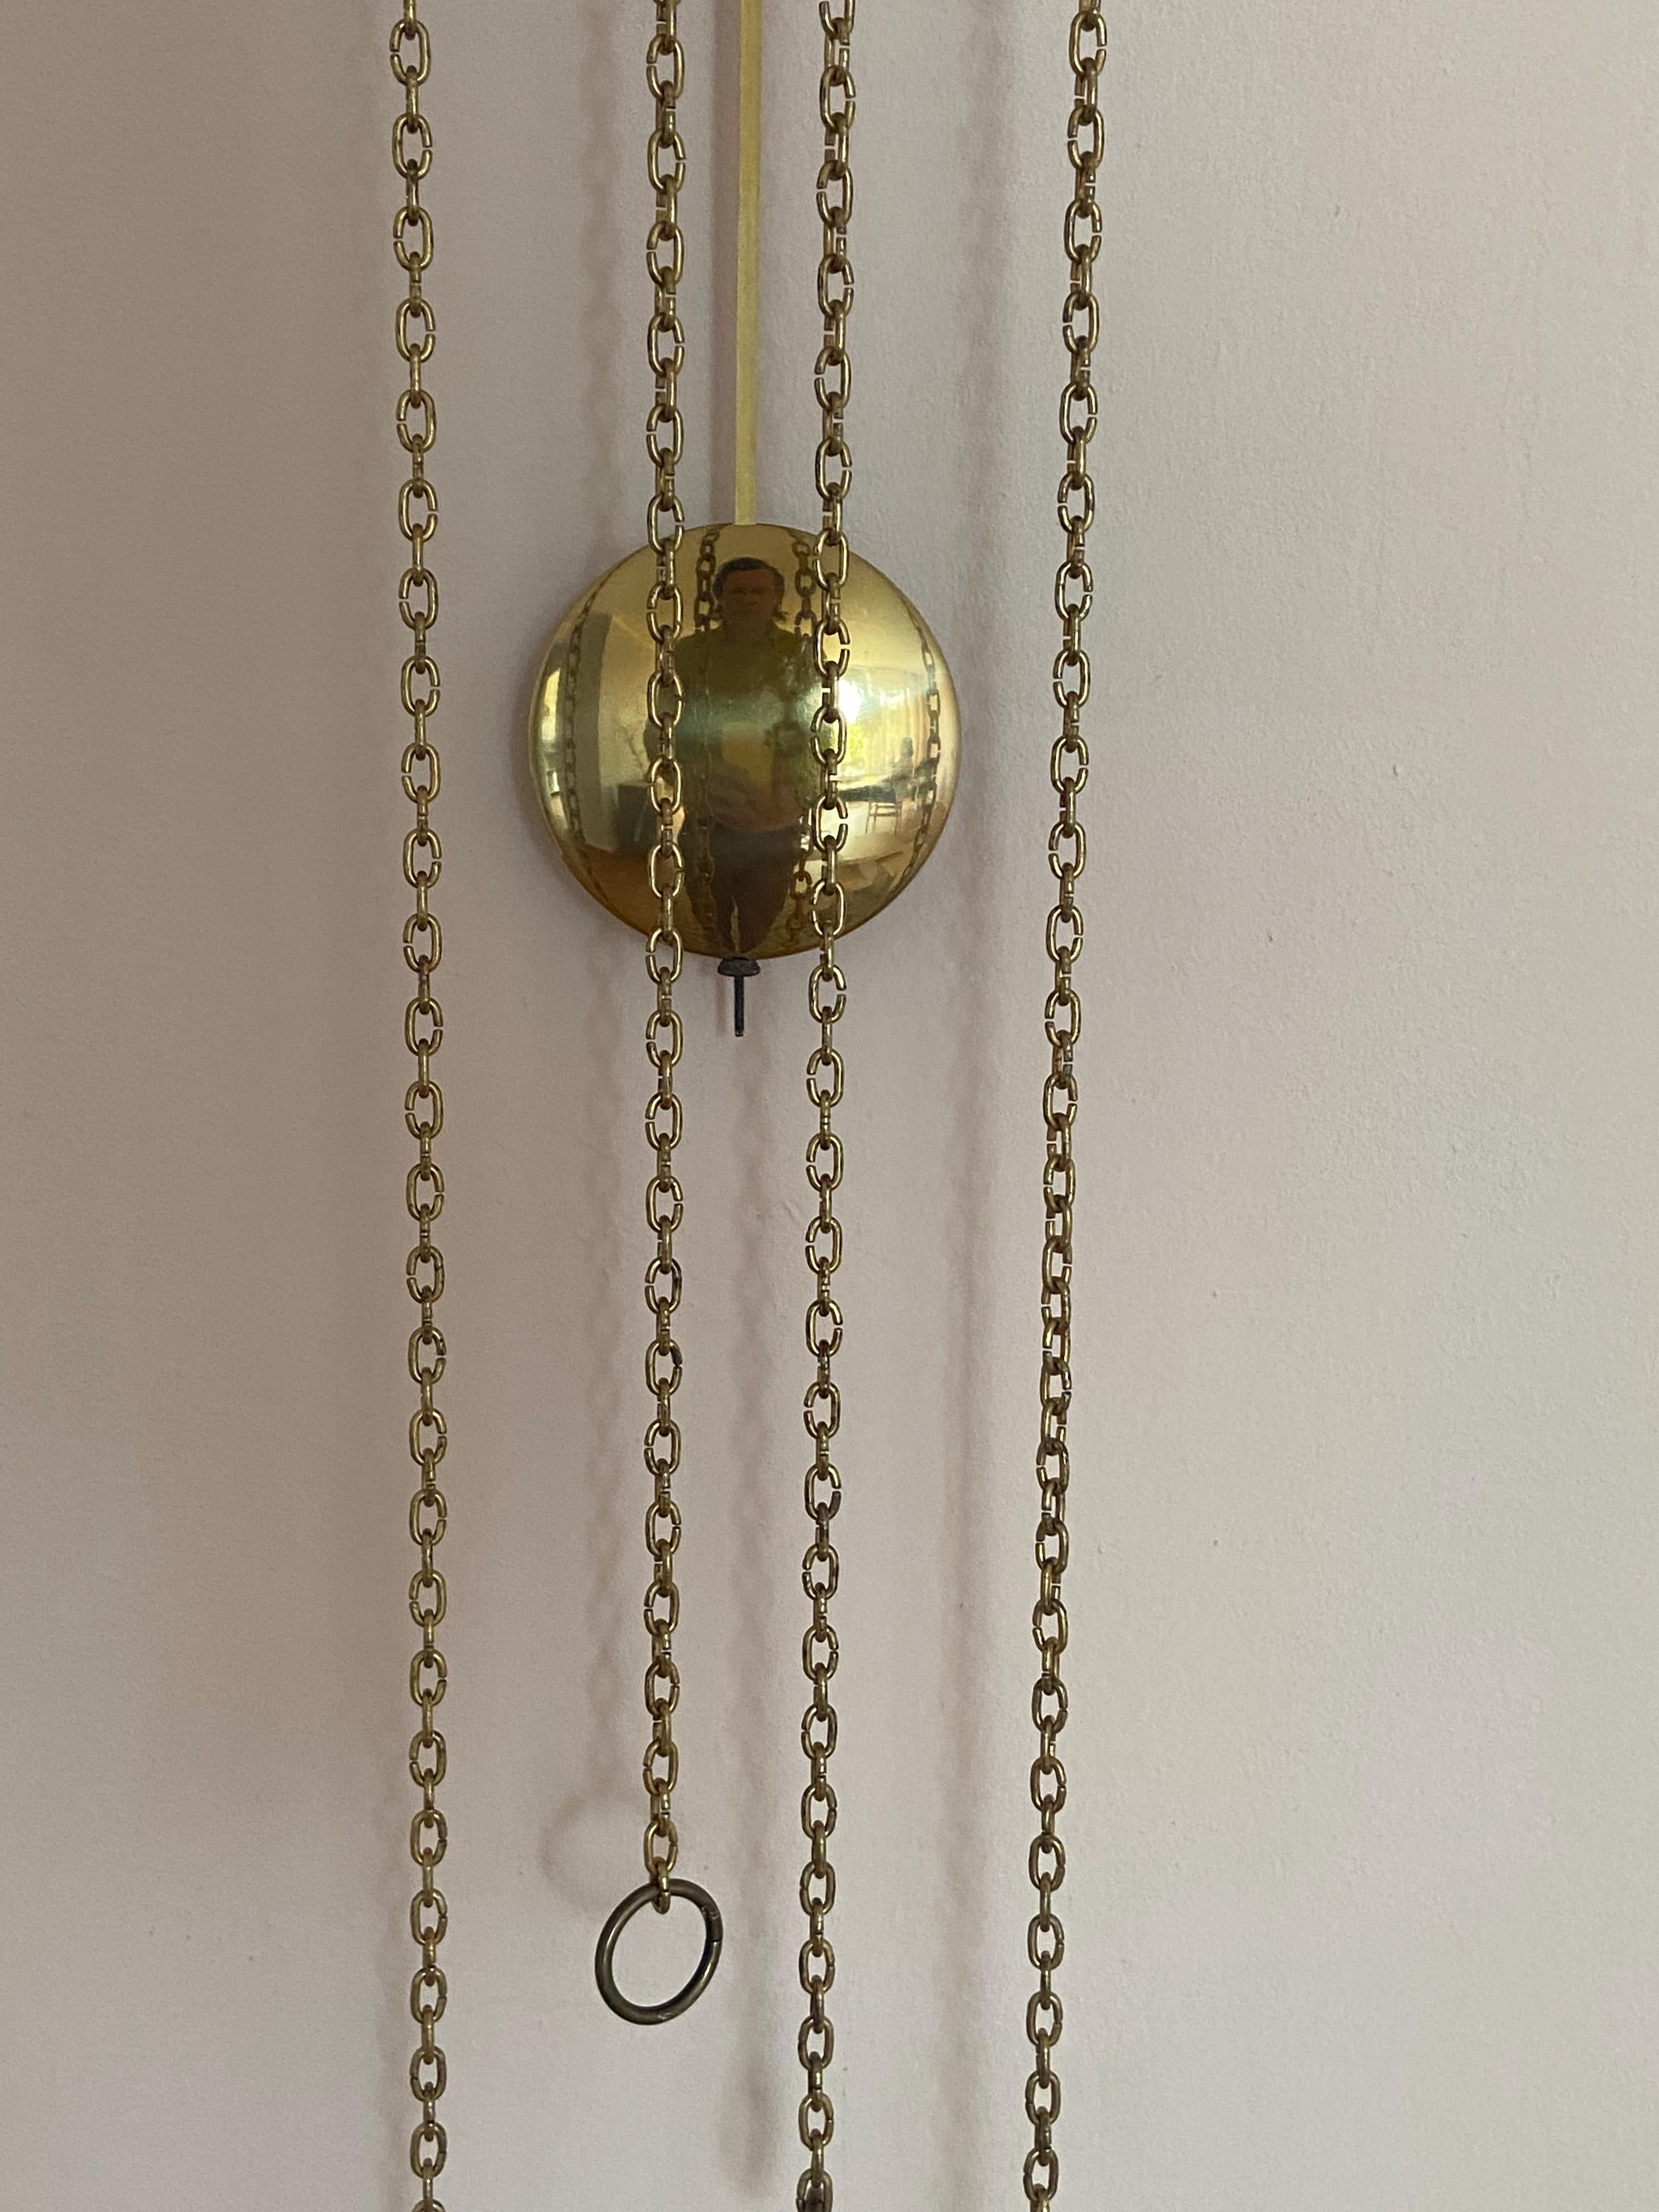 German 1960s Junghans Pendulum + Weights + Gong Wall Clock For Sale 2